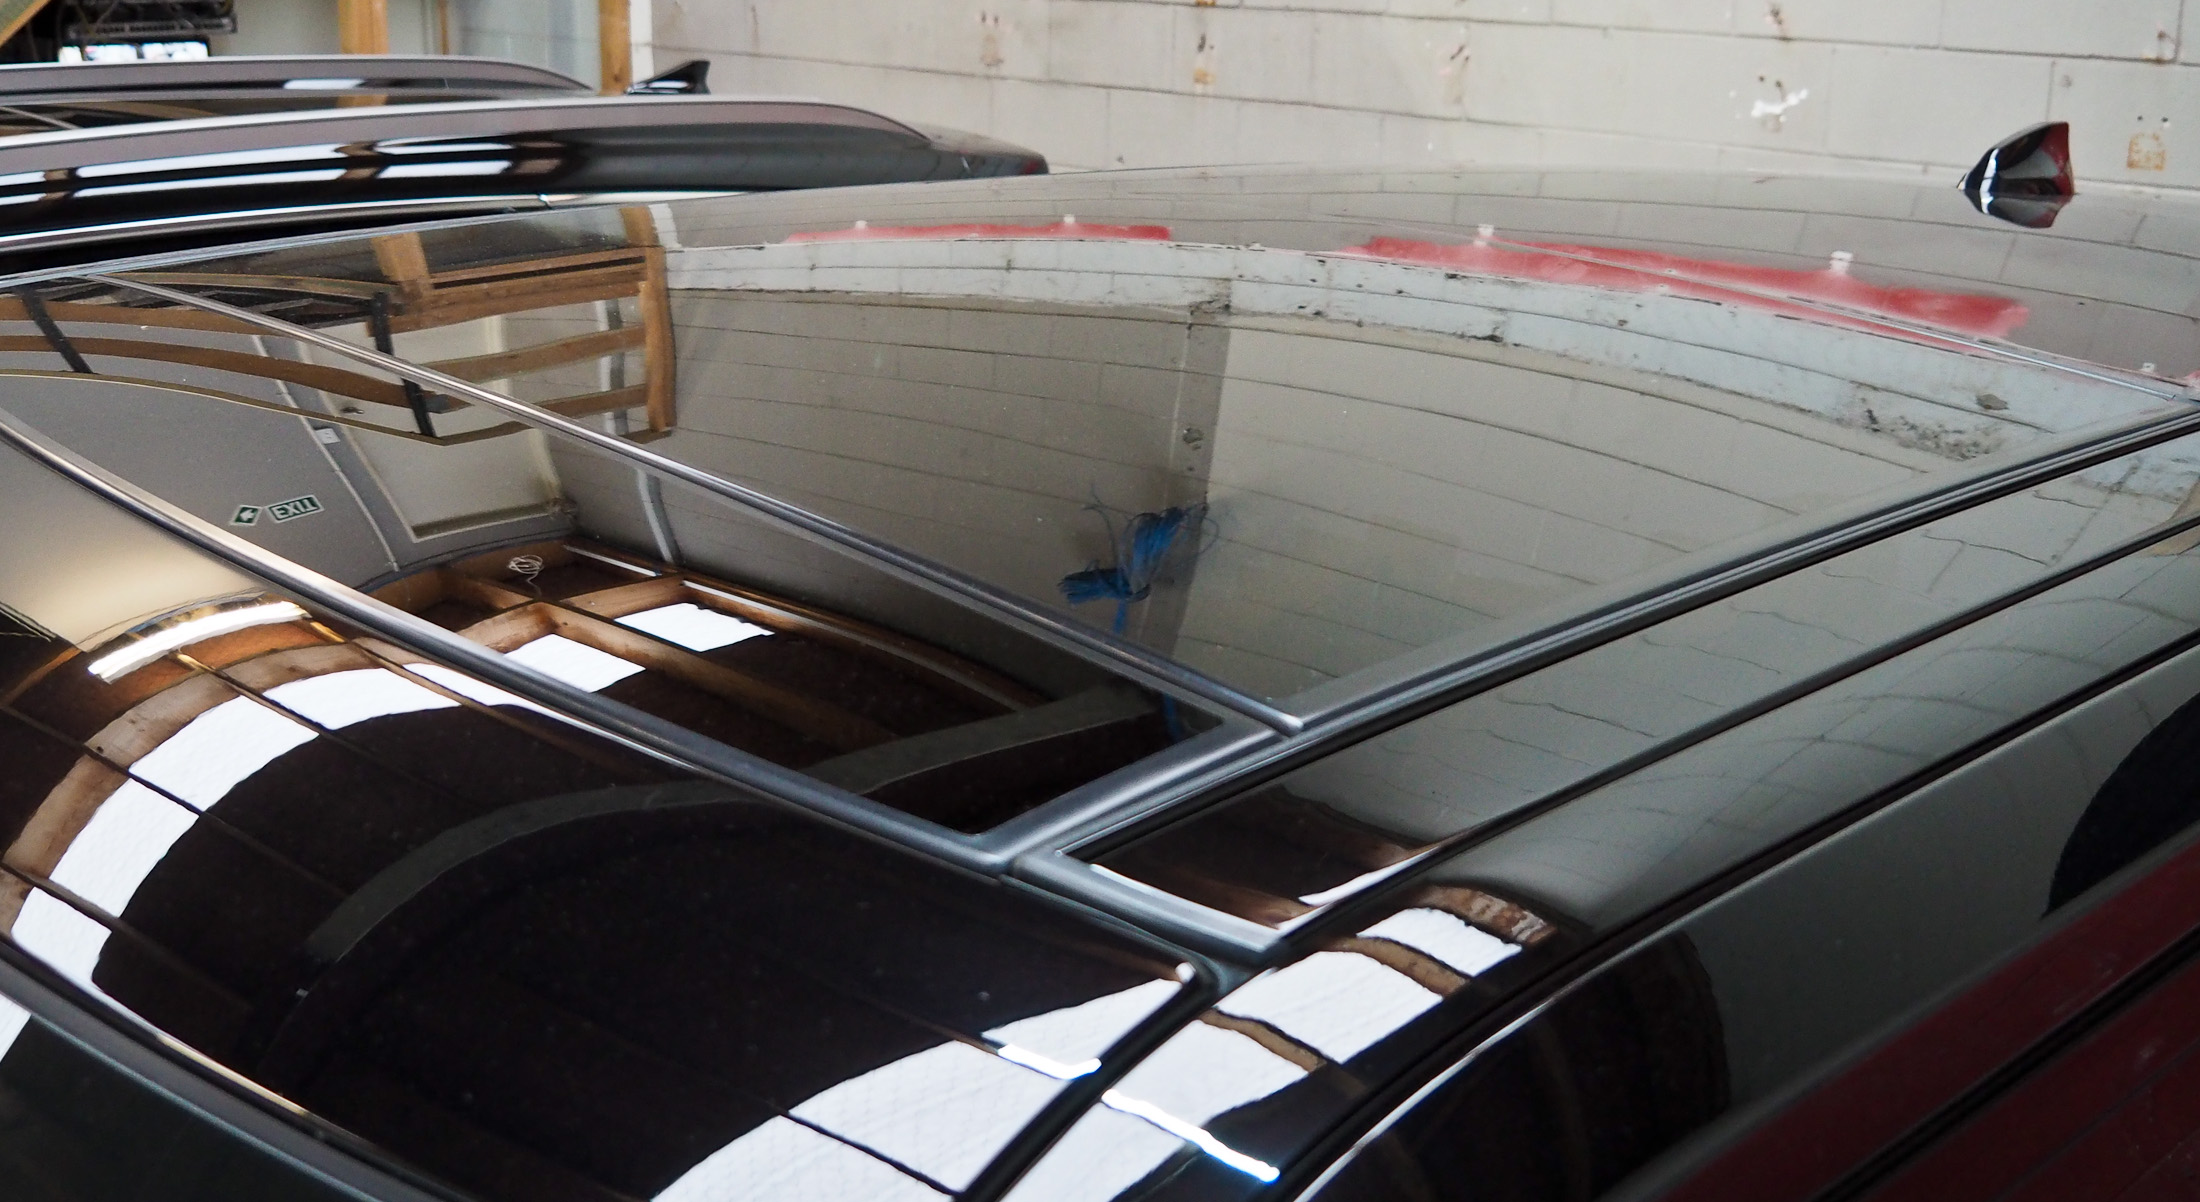 Range Rover Roof with ceramic coating applied